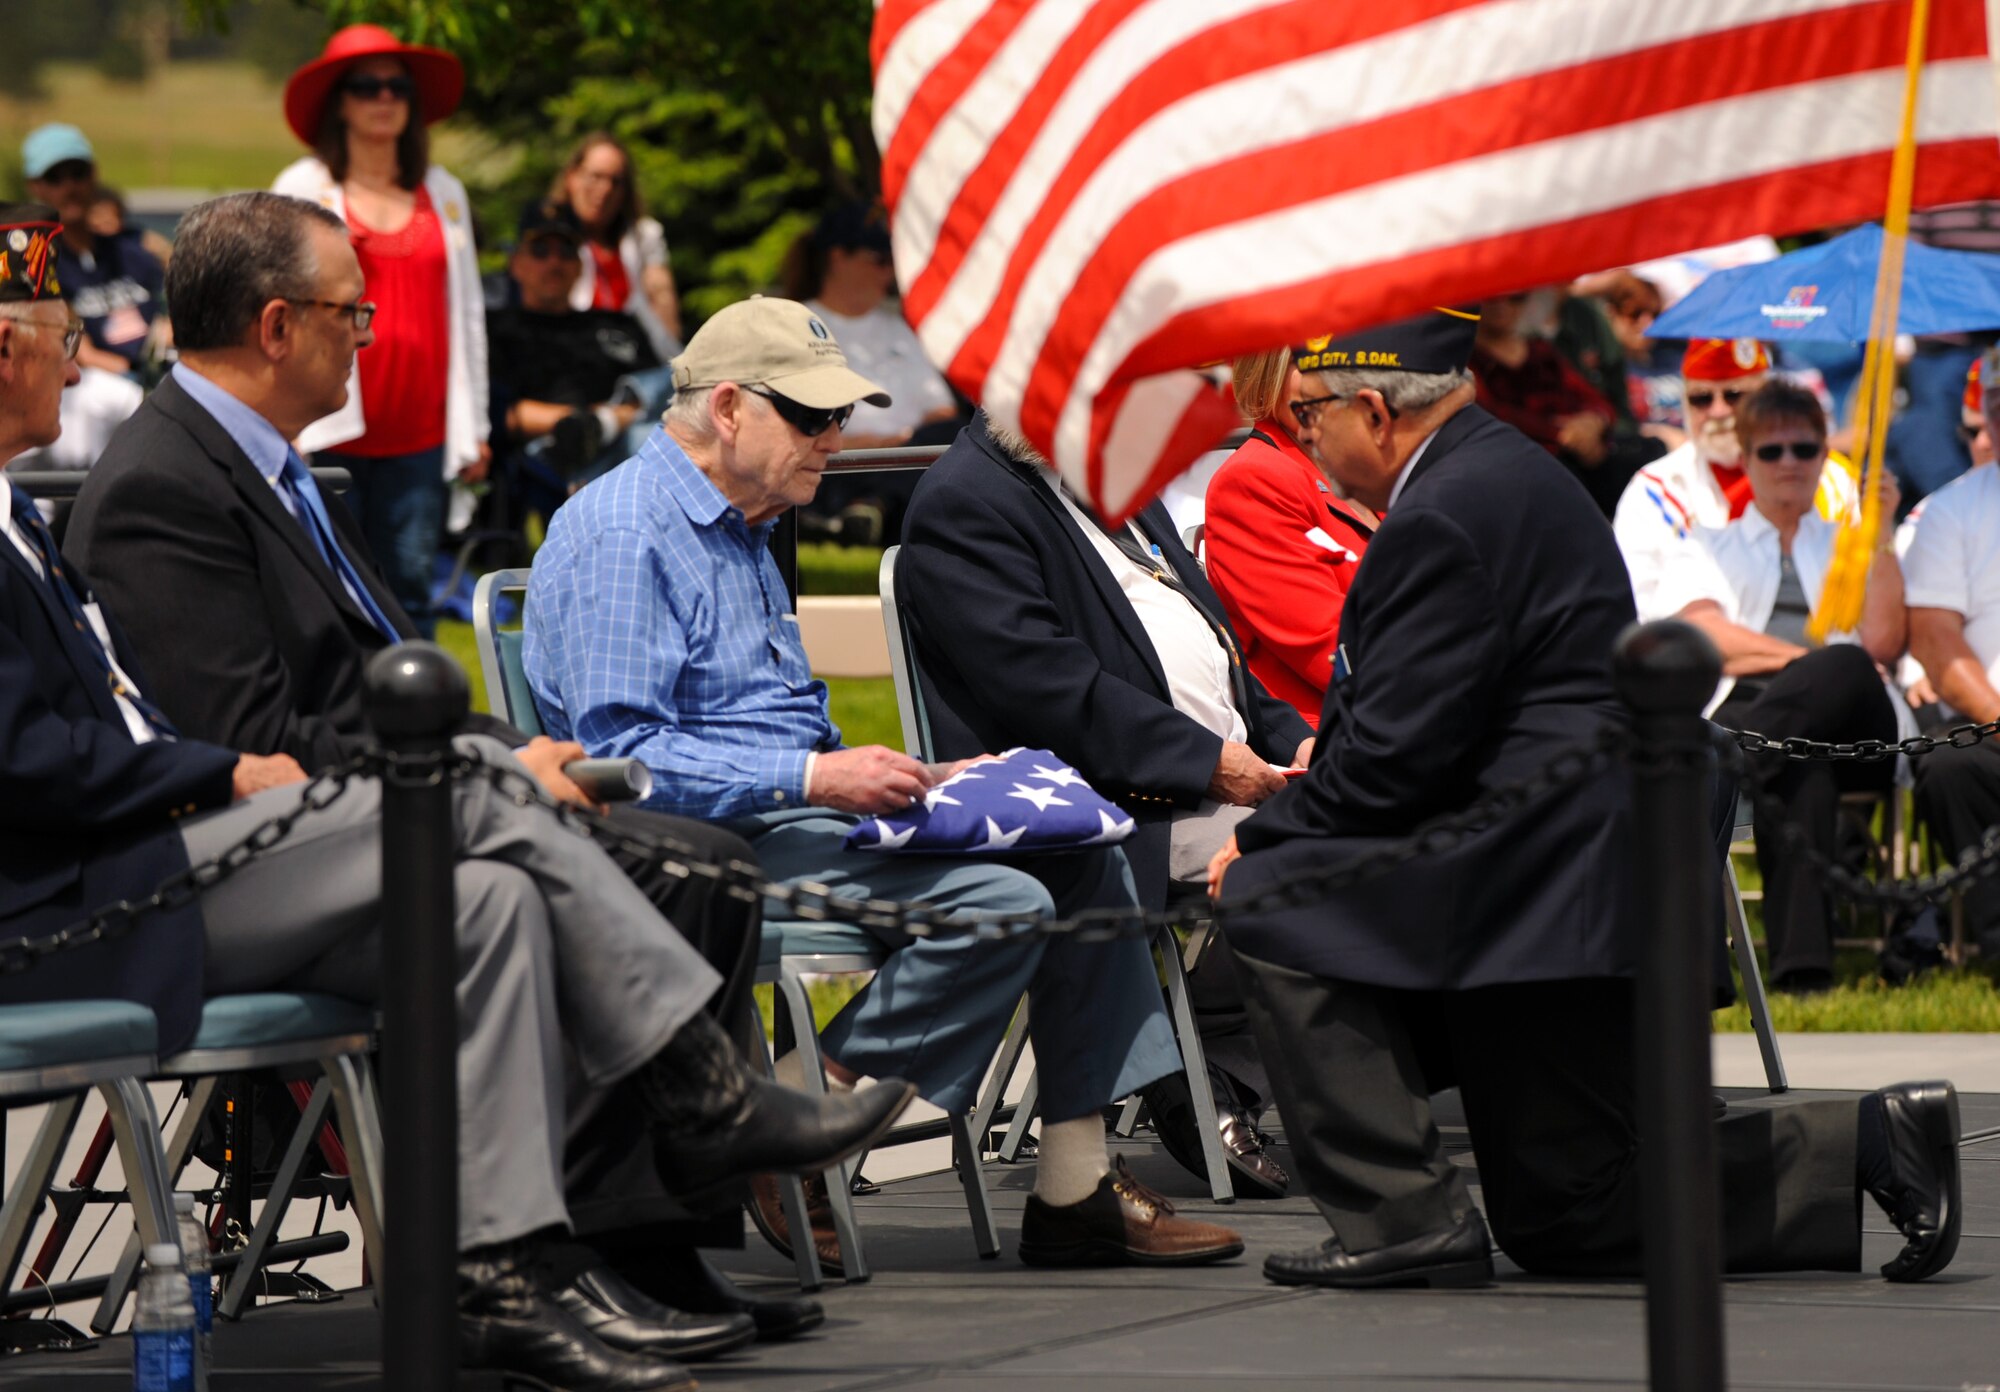 Maurice Crow, a World War II veteran, receives a folded flag during a Memorial Day ceremony at the Black Hills National Cemetery in Sturgis, S.D., May 30, 2016. Crow served in the U.S. Army Air Corps from 1942 to 1945 as an in-flight mechanic for the B-17 Flying Fortress. (U.S. Air Force photo by Airman 1st Class Denise M. Nevins/Released)